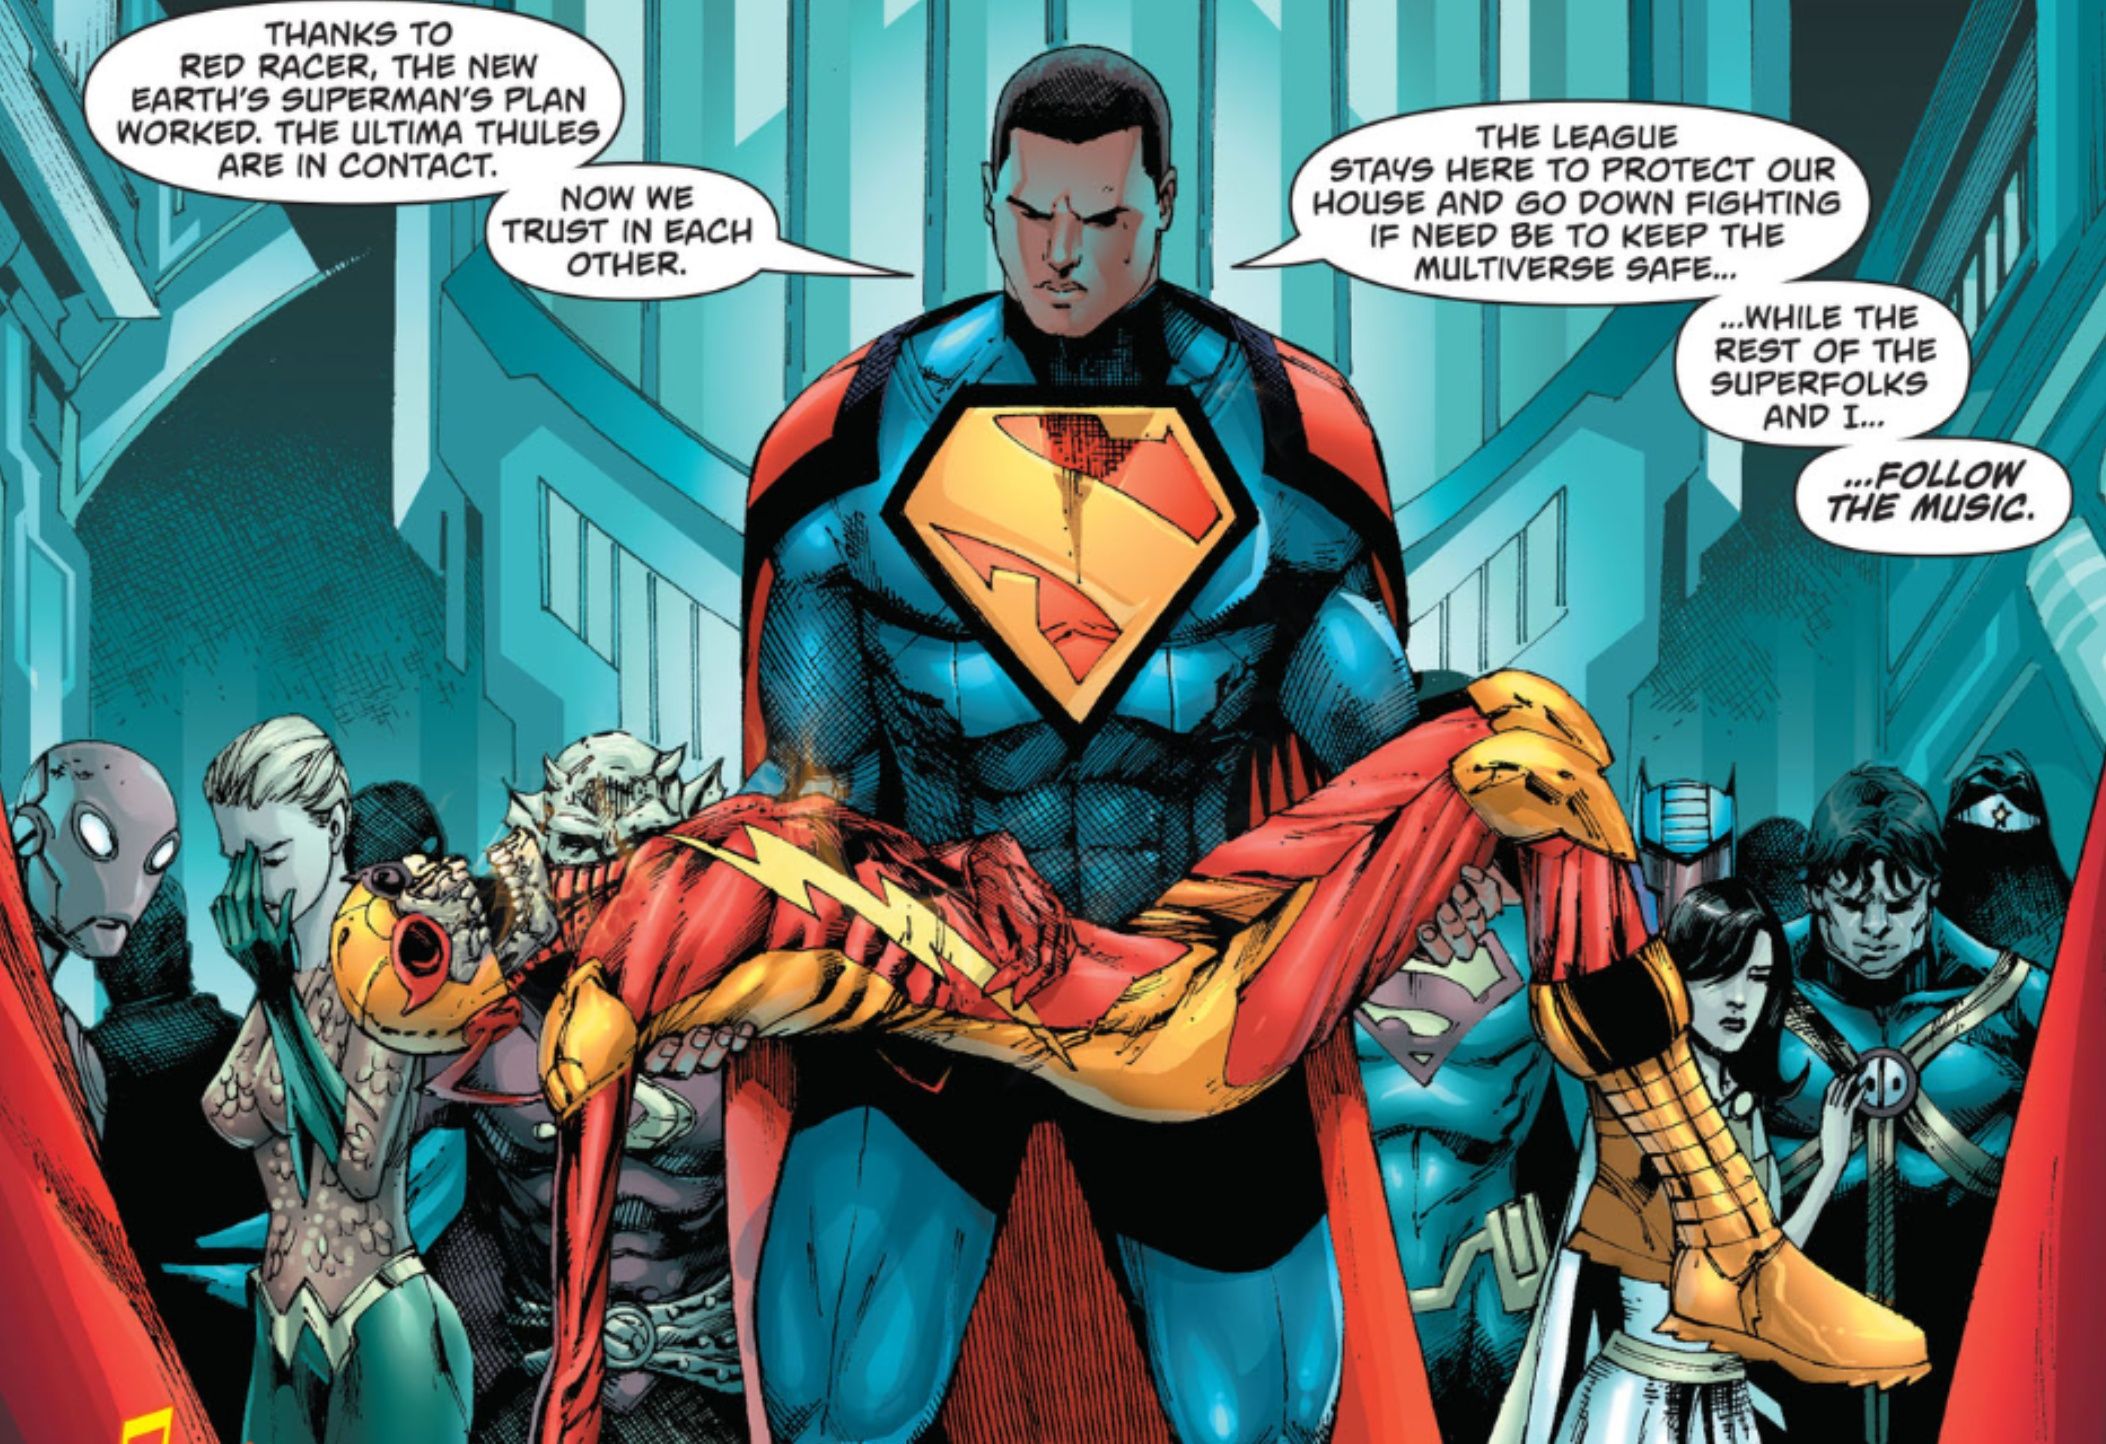 Red Racer's death in Superman #16